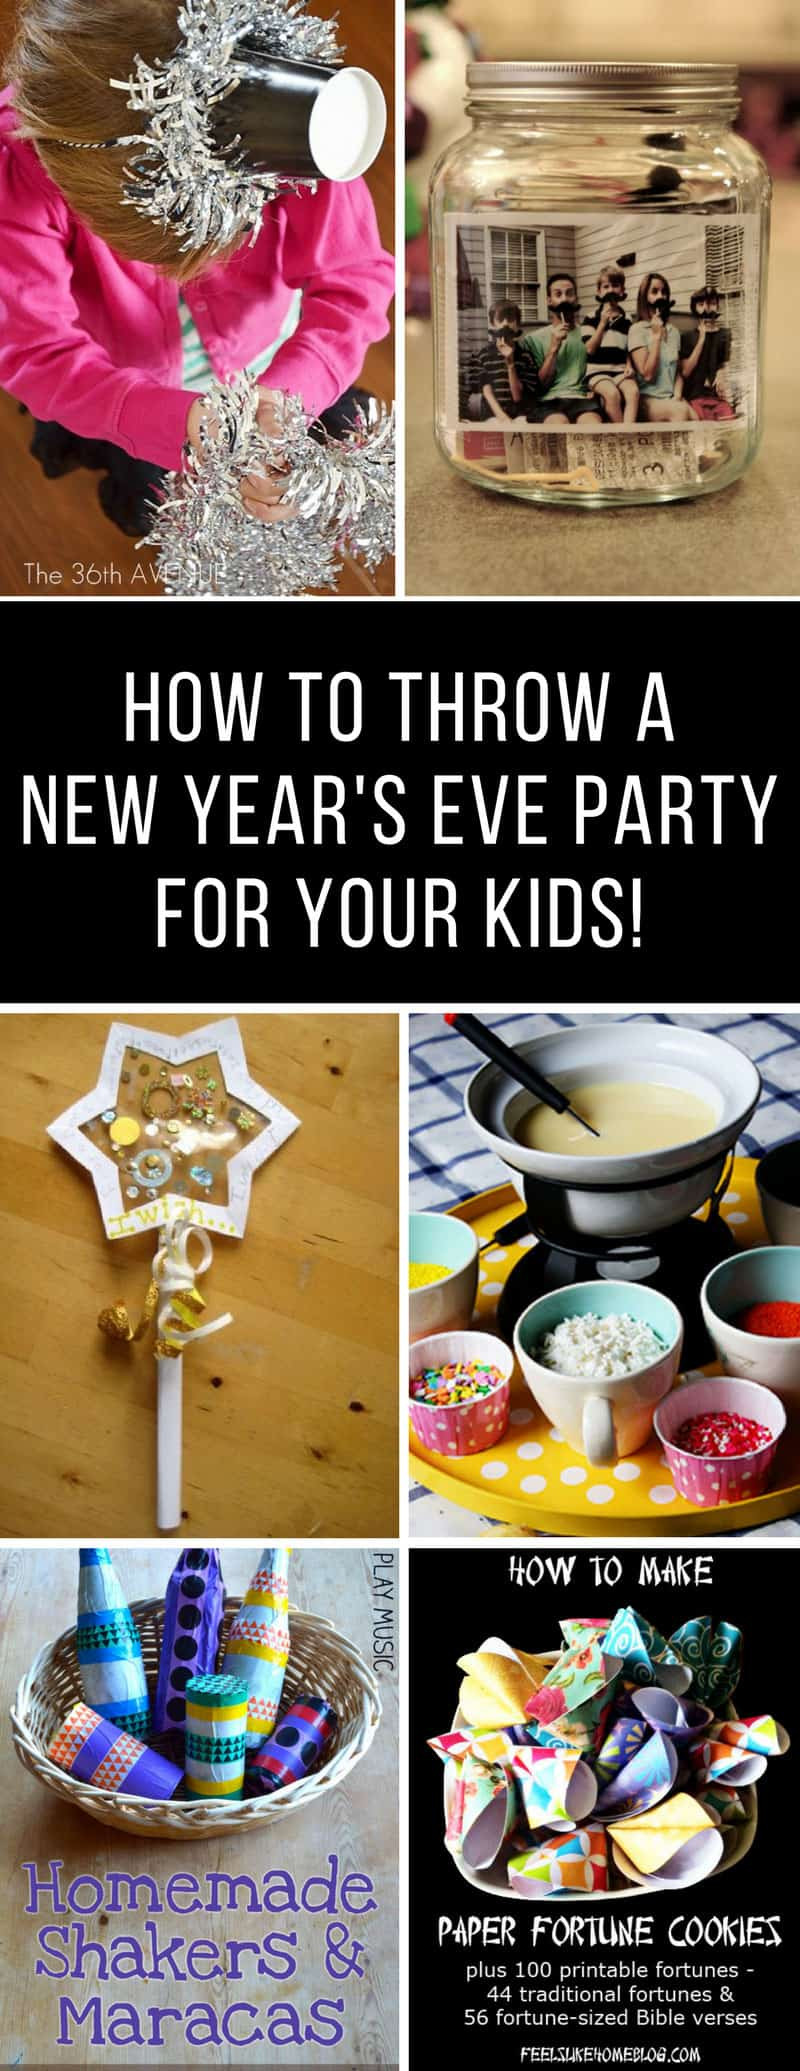 New Year Eve Party For Kids
 How to Throw a New Year s Eve Party for the Kids